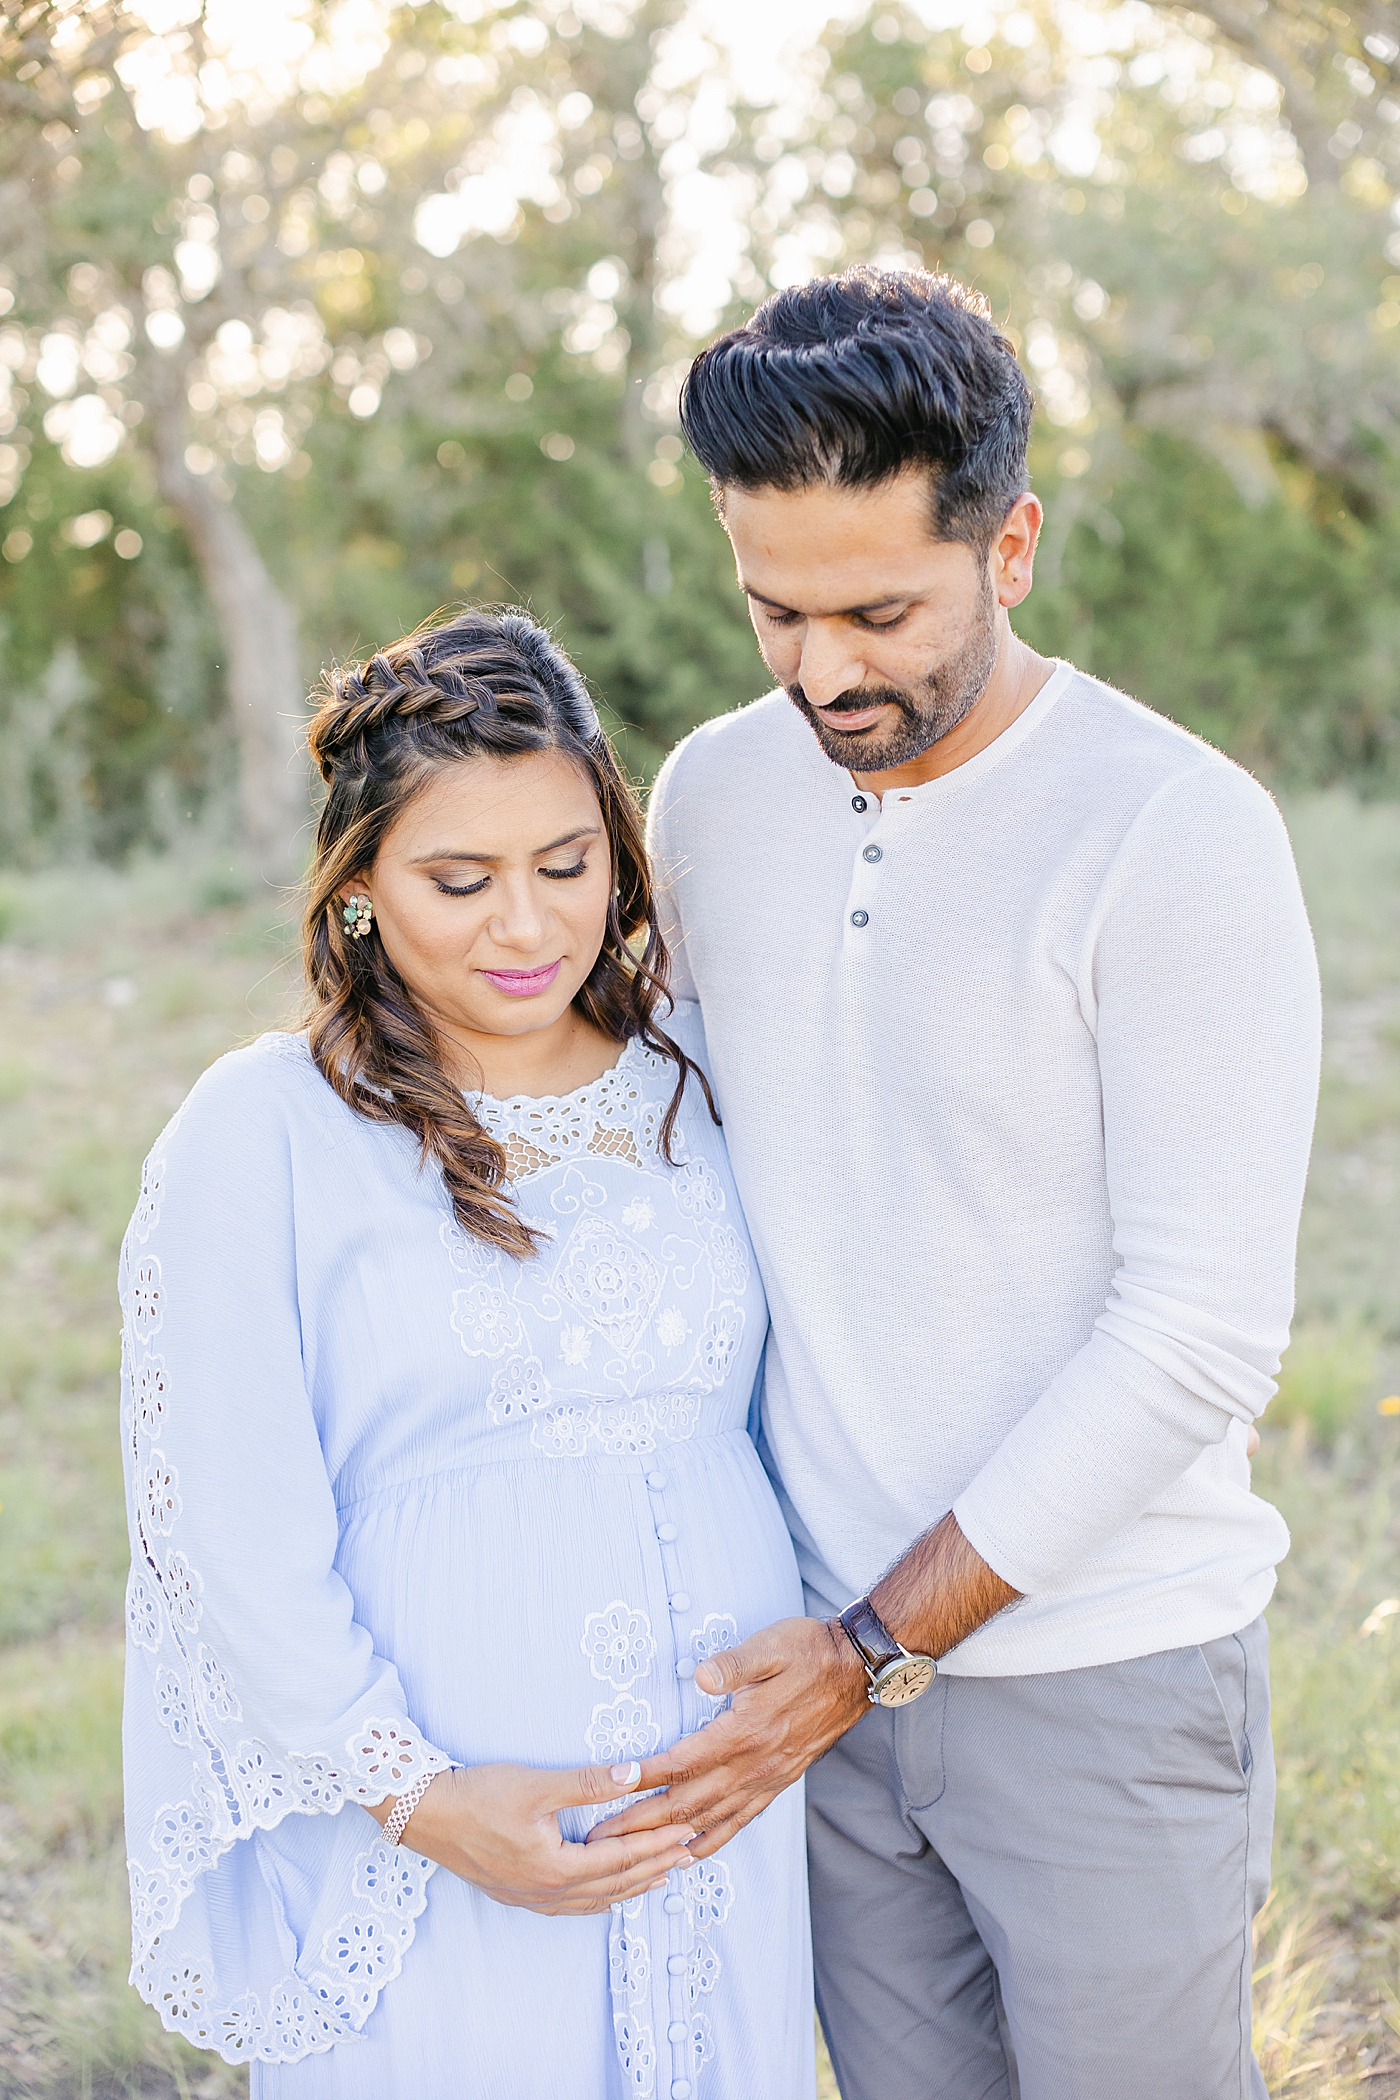 Mom and dad to be cradling mom's belly | Photo by Sana Ahmed Photography